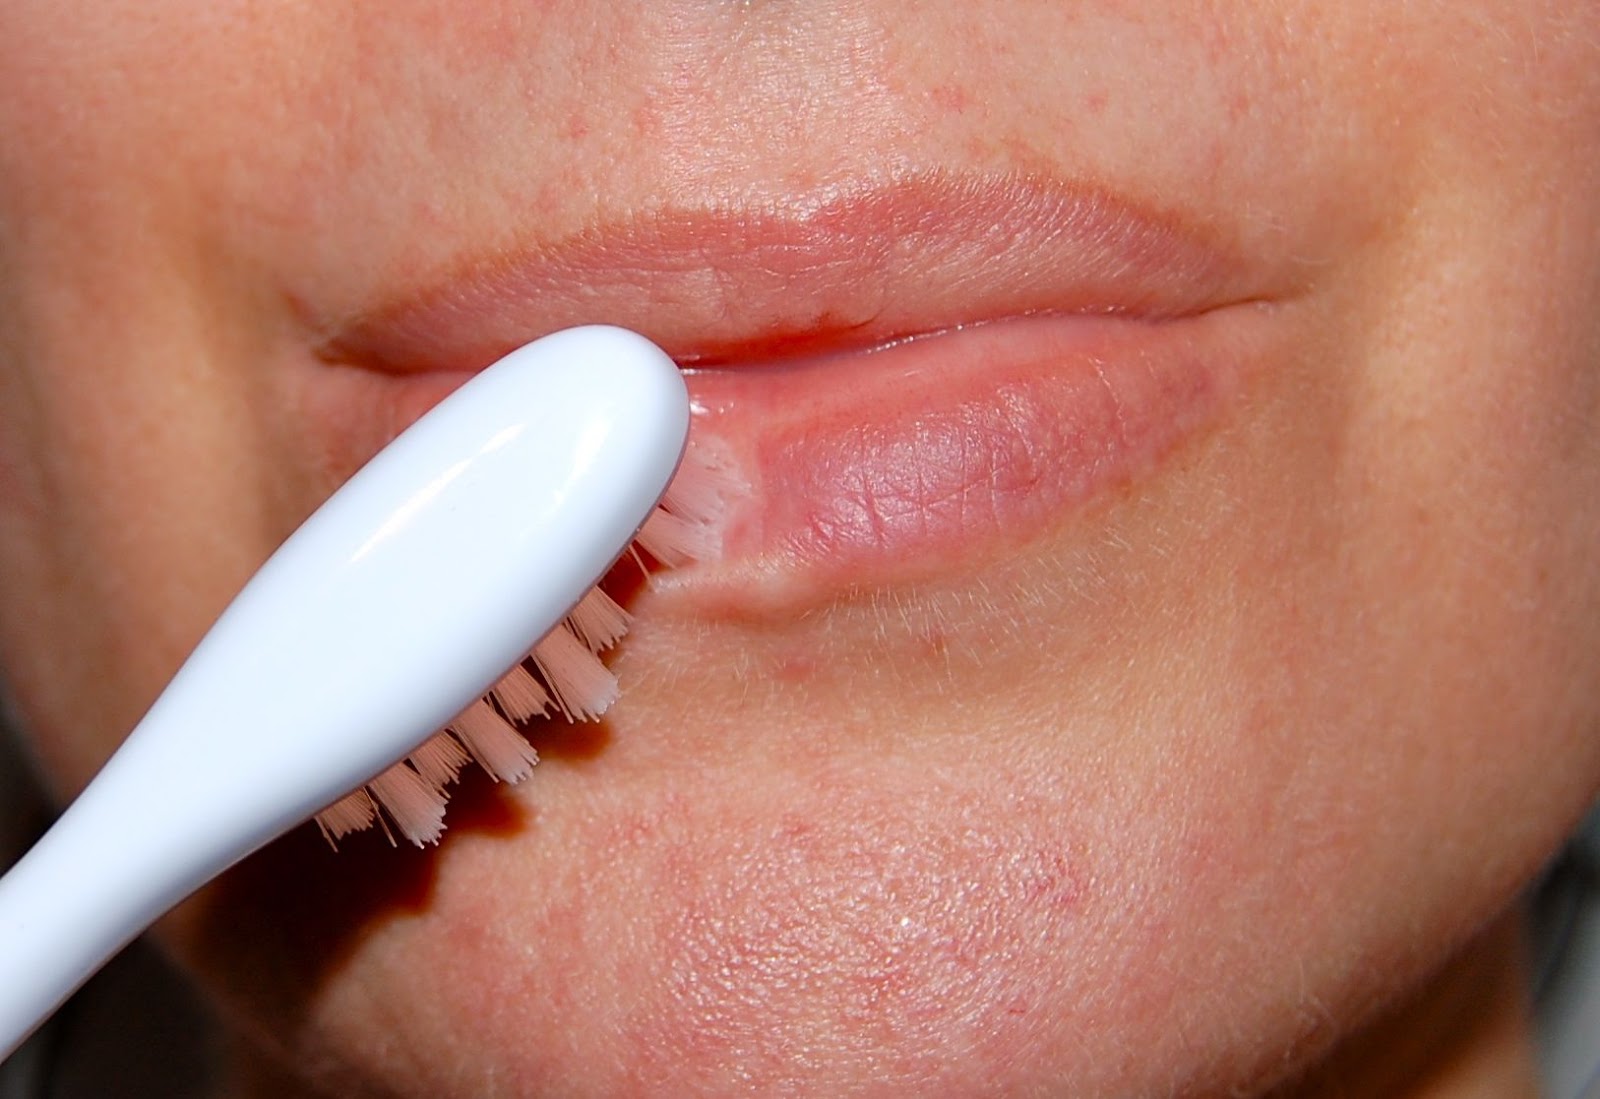 How To Exfoliate Your Lips With A Toothbrush